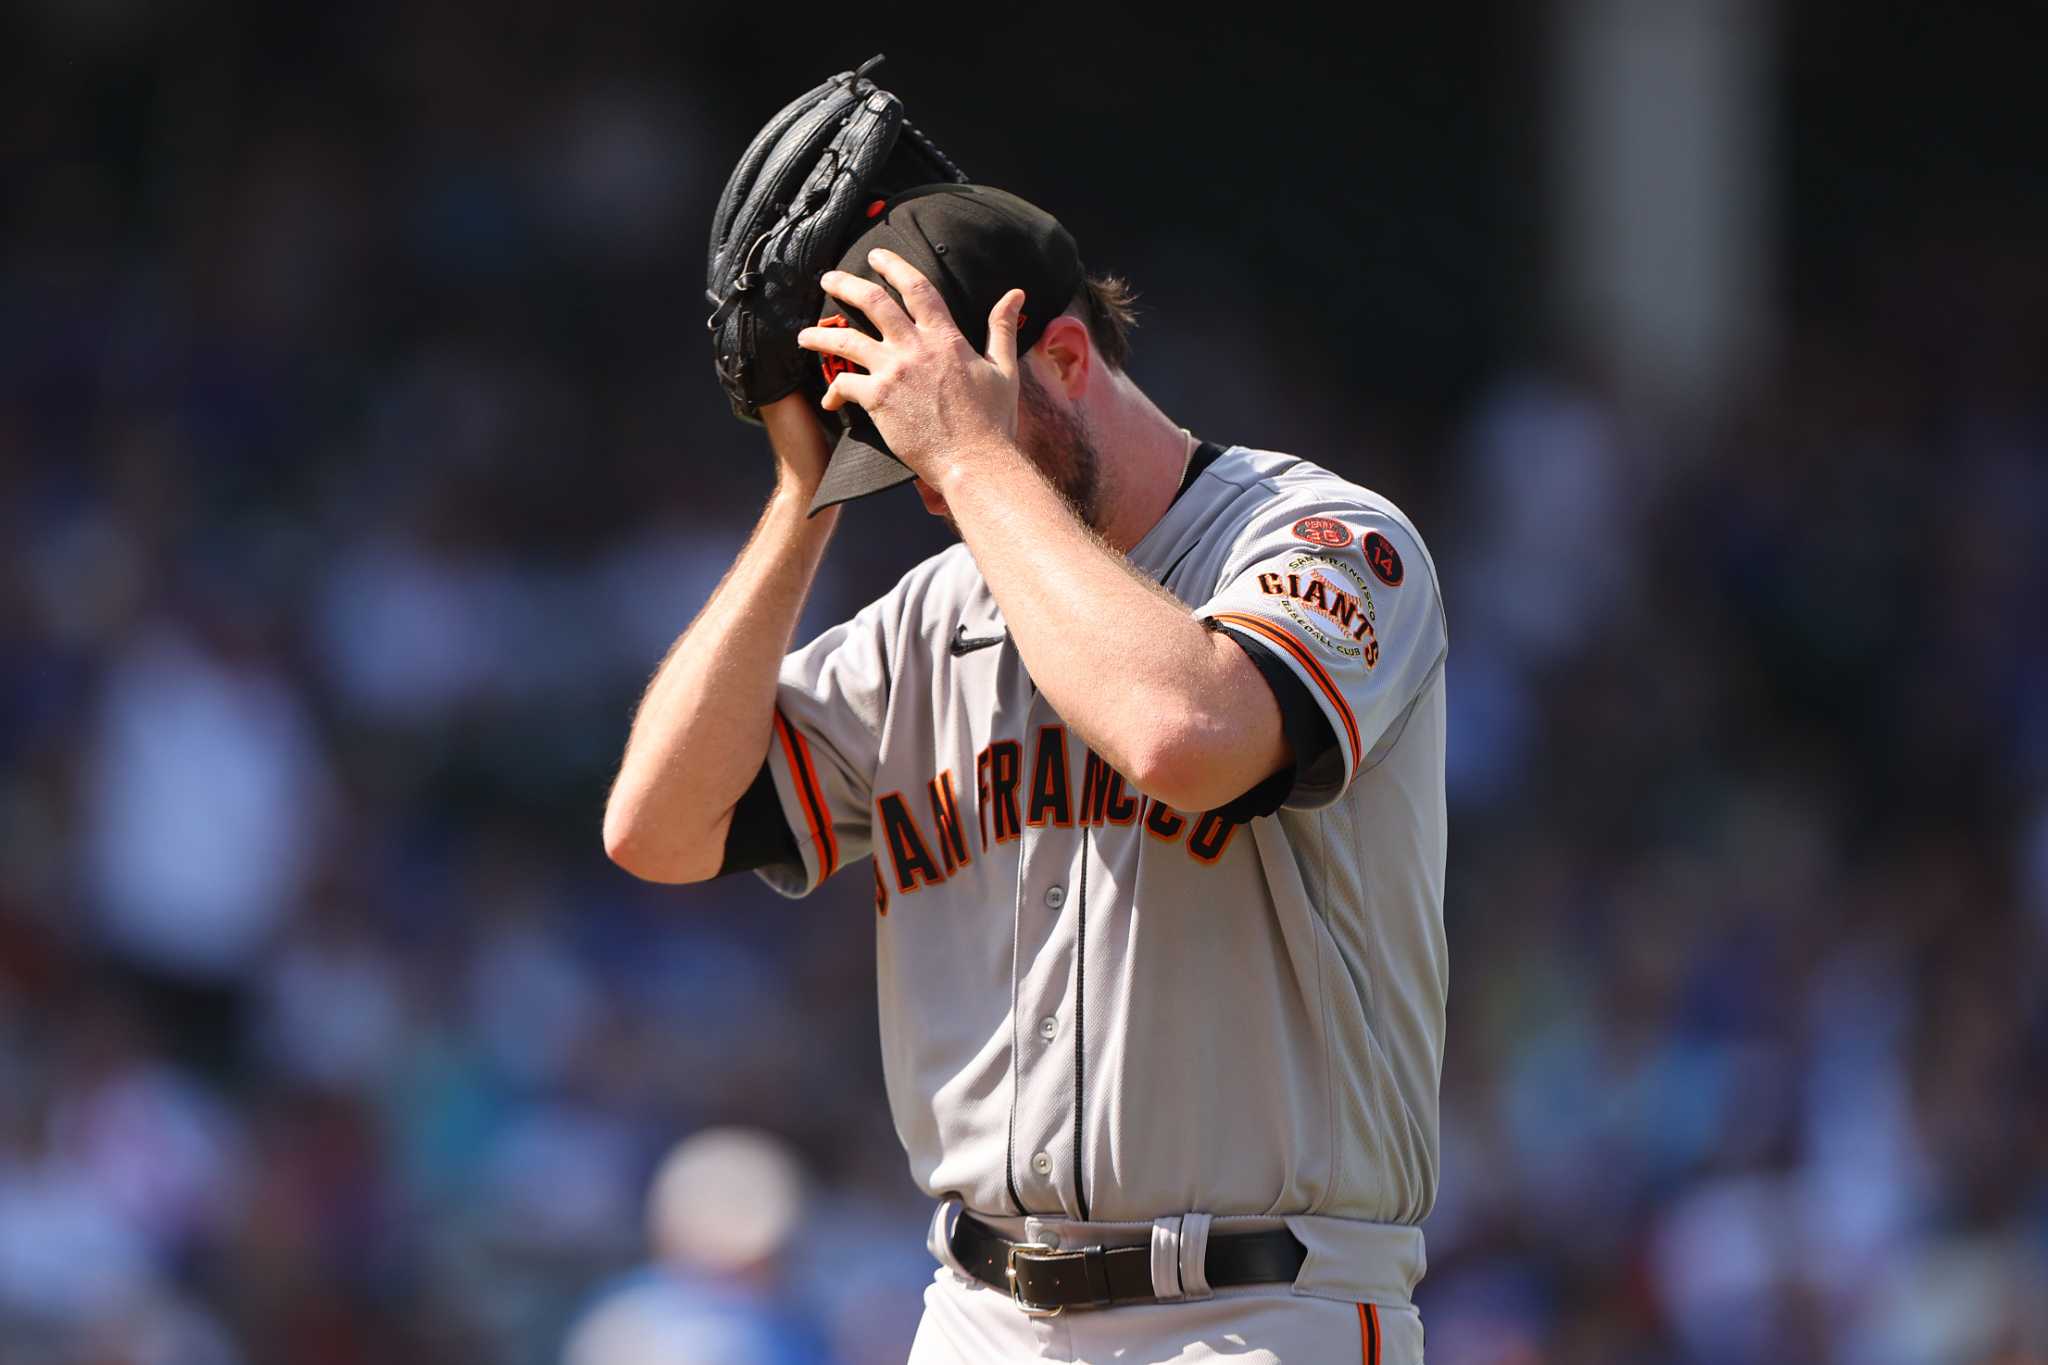 This week in SF Giants: Ohtani, Bochy matchups begin tough stretch